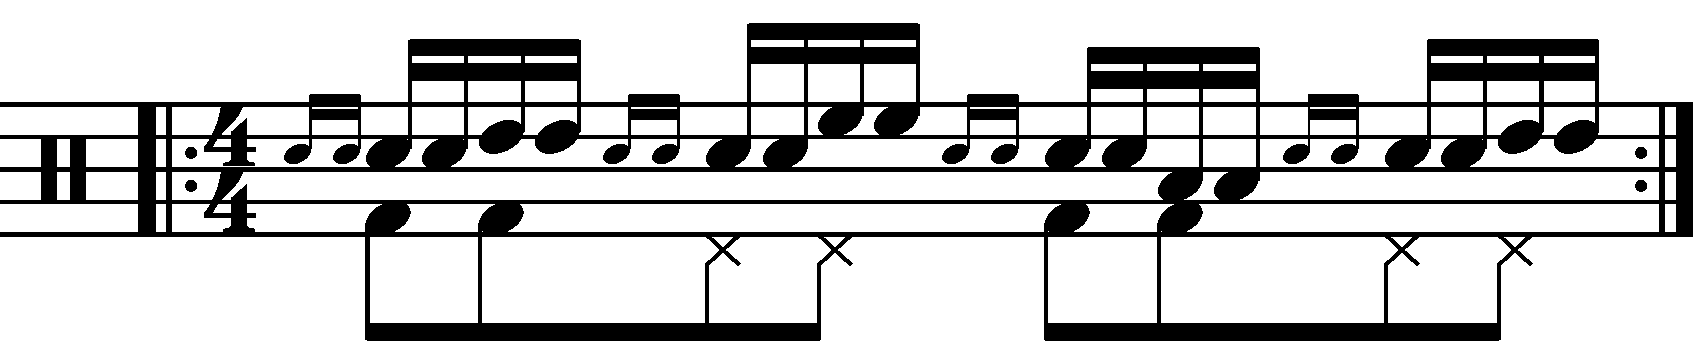 The Dragadiddle with moving double strokes